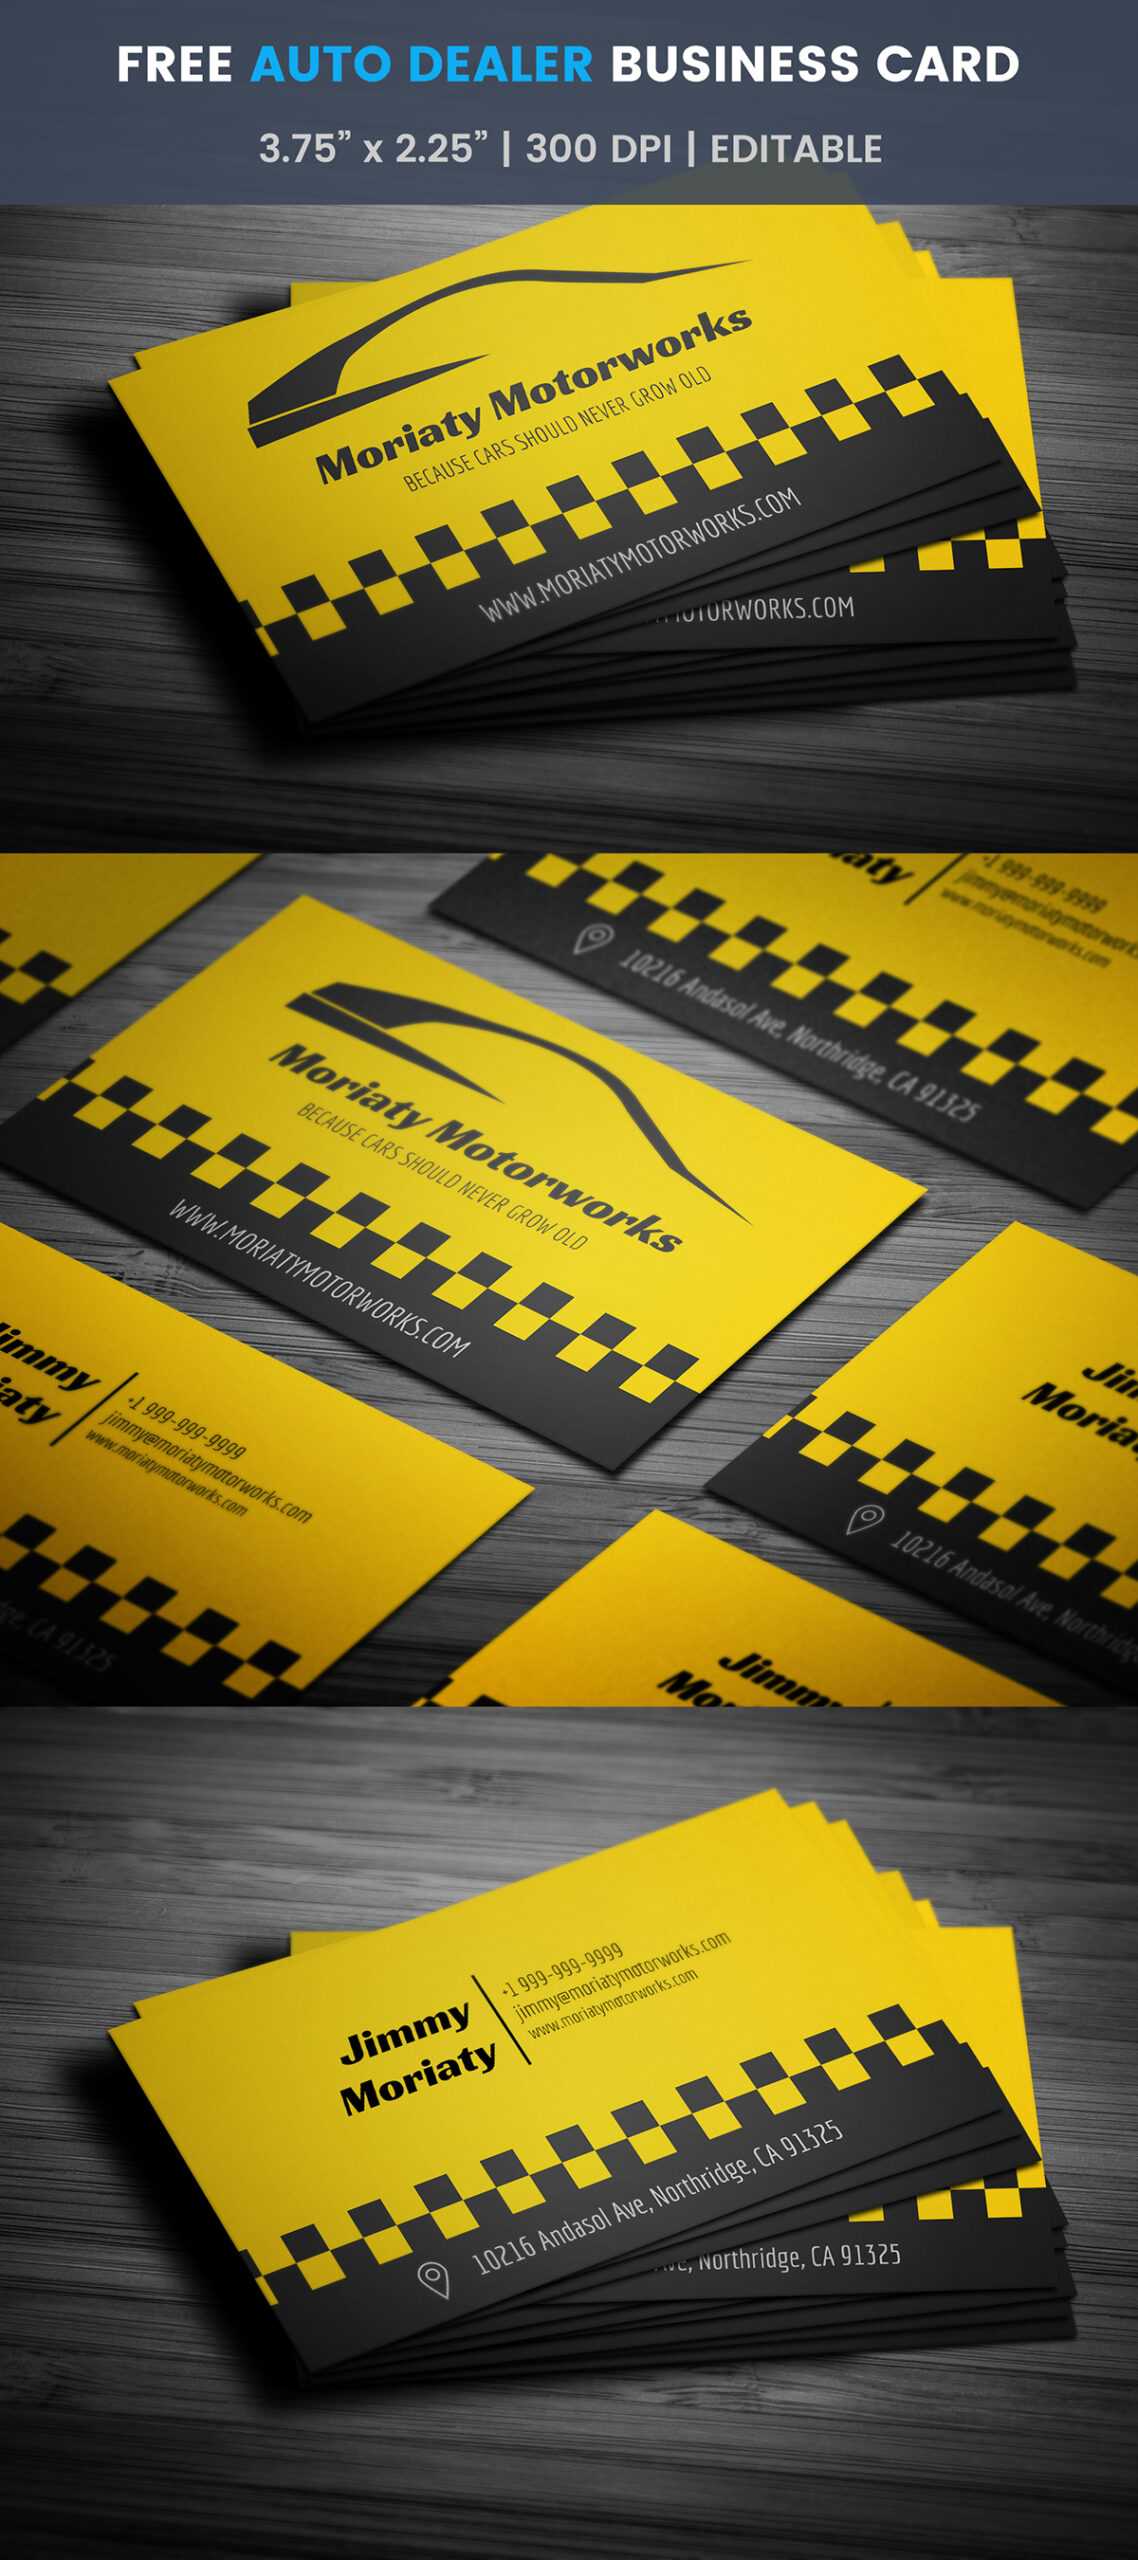 Free Automotive Business Card Template On Student Show With Regard To Automotive Business Card Templates